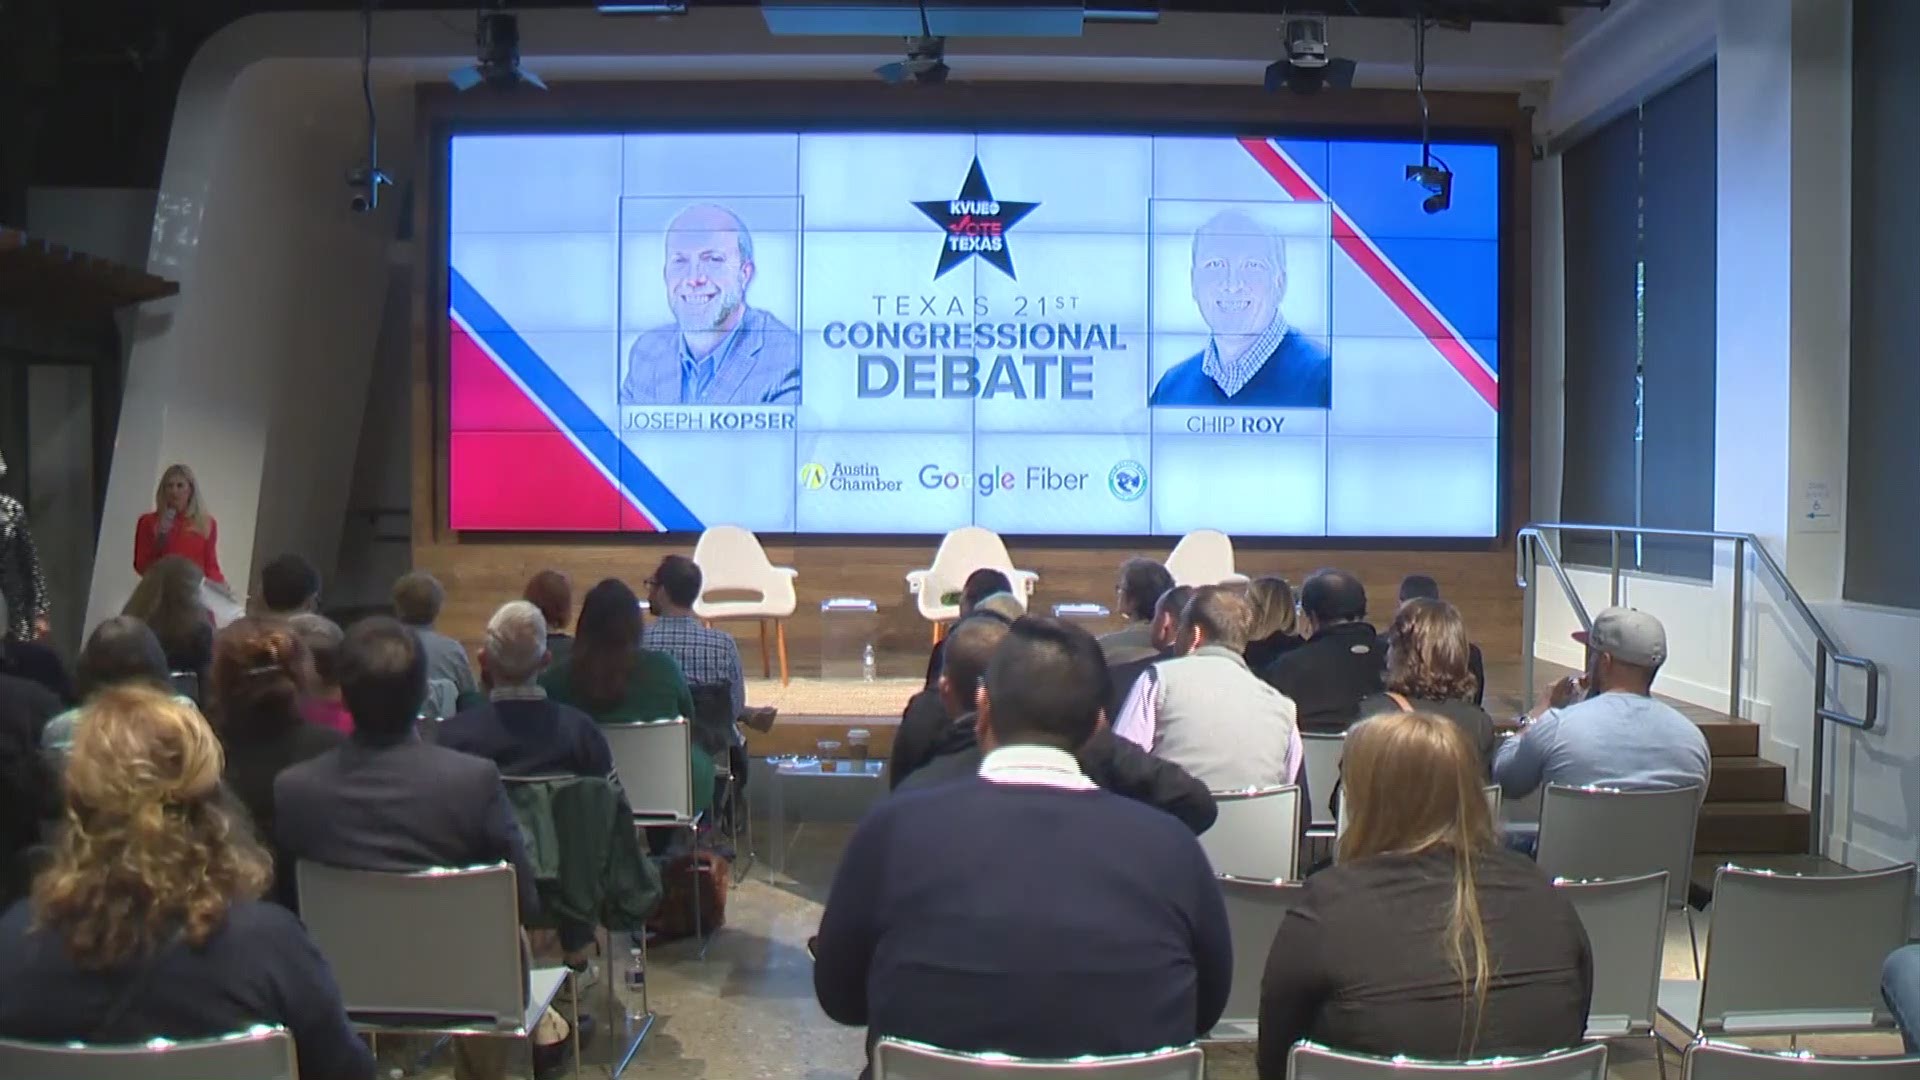 KVUE News partnered with the Greater Austin Chamber of Commerce, San Marcos Area Chamber of Commerce and Google Fiber to host a debate between Democrat Joseph Kopser and Republican Chip Roy, candidates for the U.S. House of Representatives District 21.